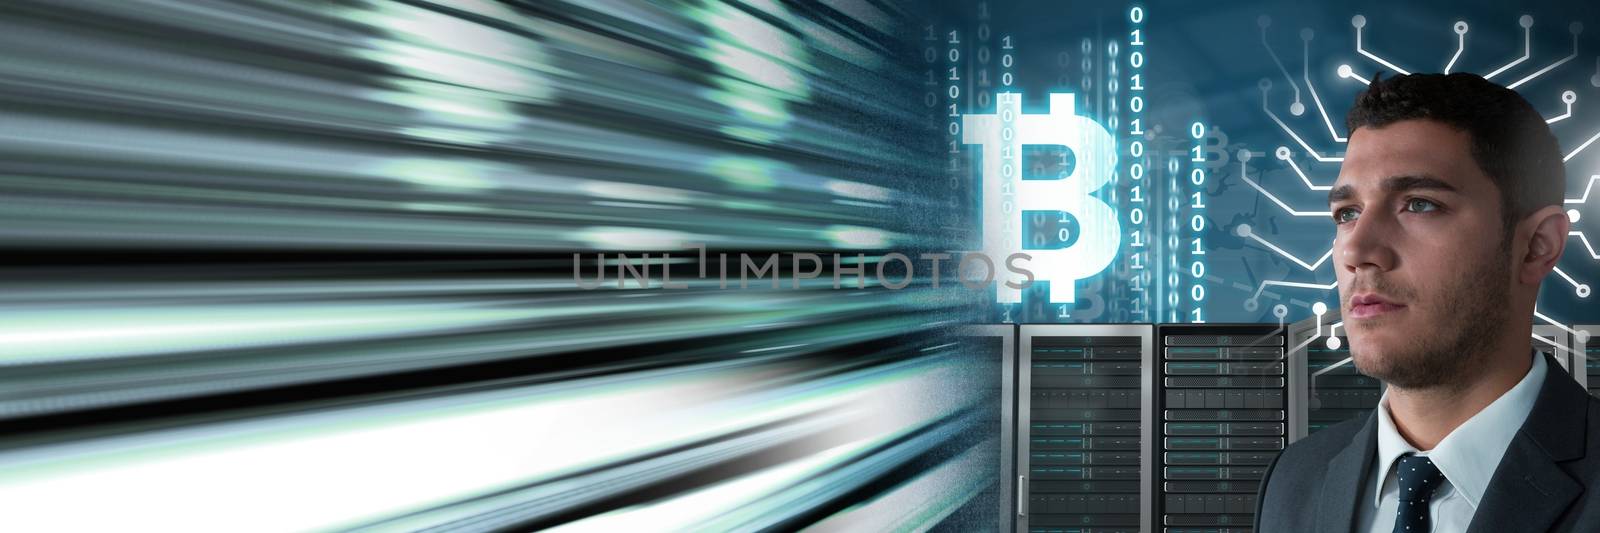 Man with computer servers and bitcoin technology information interface transition by Wavebreakmedia